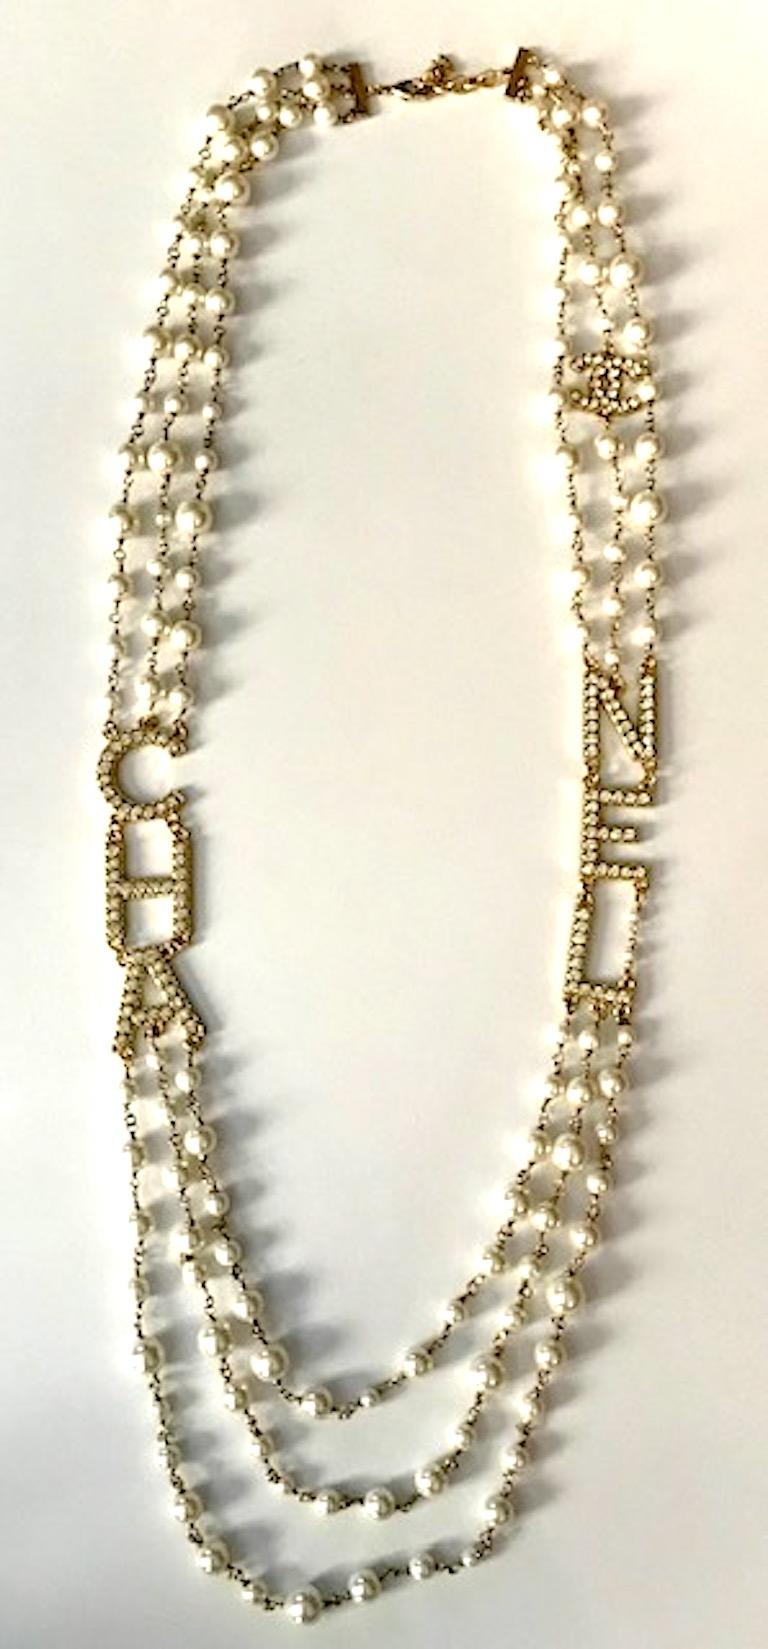 Chanel 3 Strand Pearl & C H A and N E L Letter Necklace, 2018 Collection 10